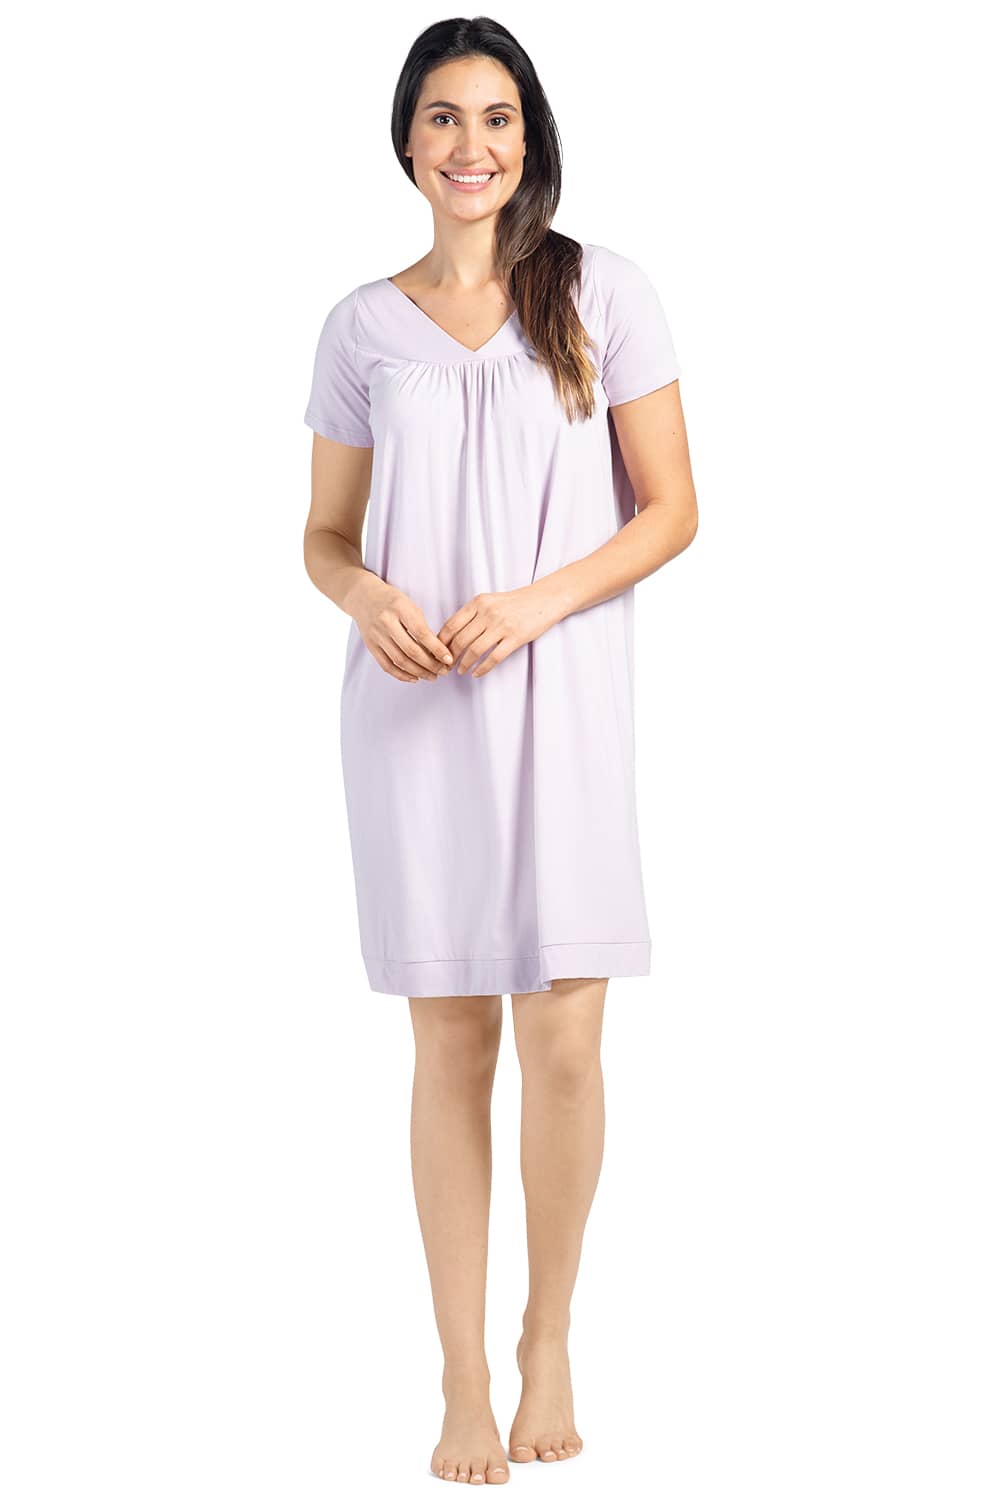 Sunflower Modal Nightgown For Women Oversized O Neck, Half Sleeves, Soft  And Comfortable Sleepwear Dress For Pregnant Women From Pekoe, $18.51